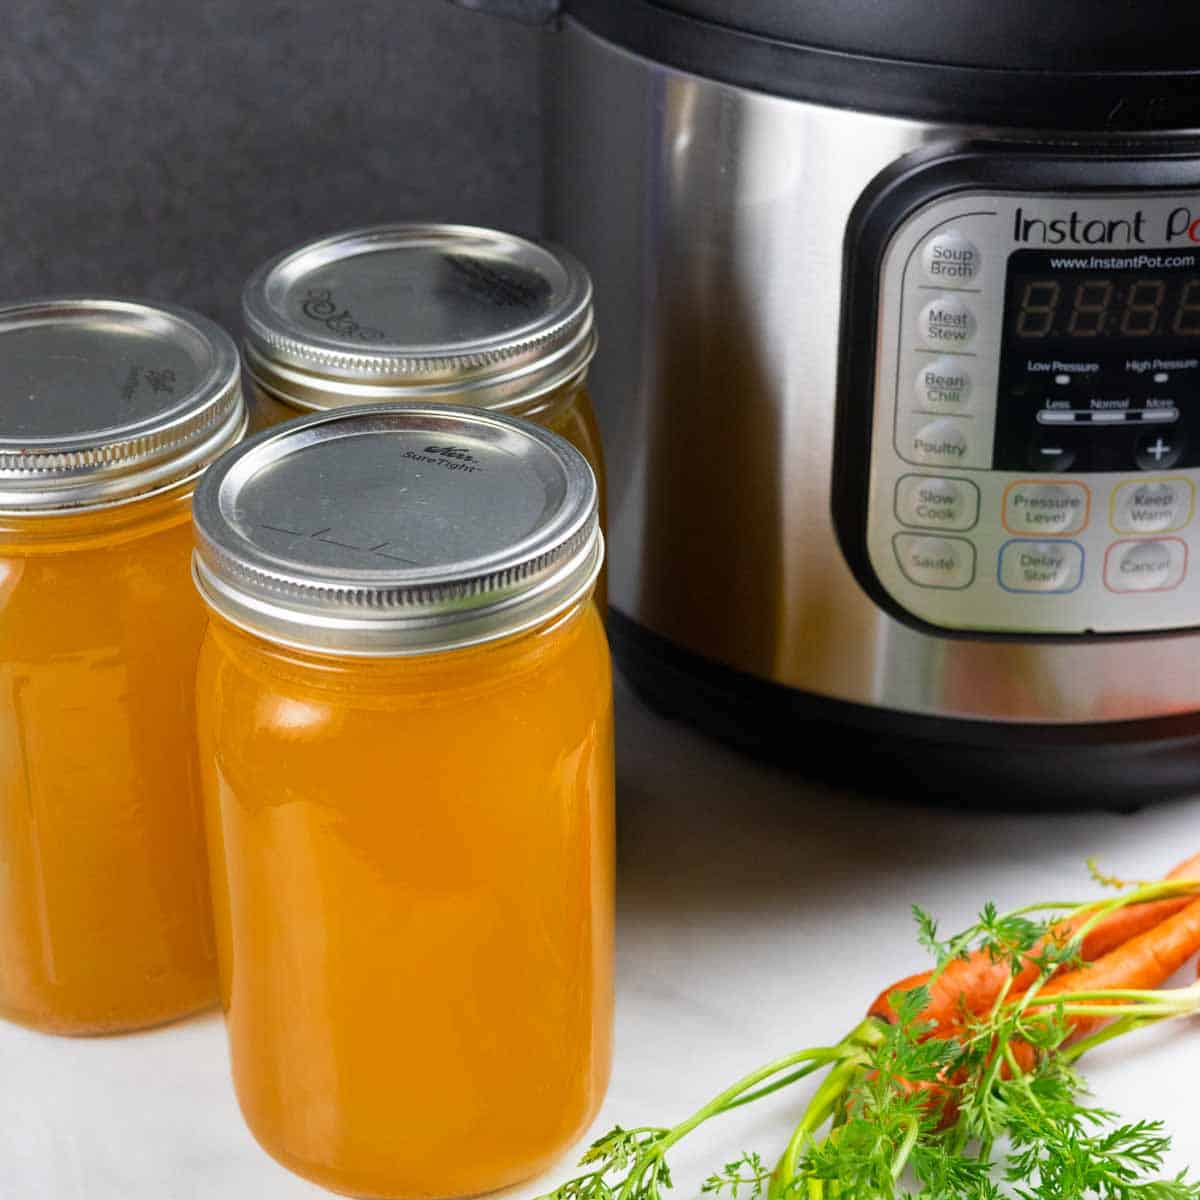 Three lidded quart jars of finished chicken bone broth on a white board, sitting next to an Instant pot with a small bunch of orange carrots in front.